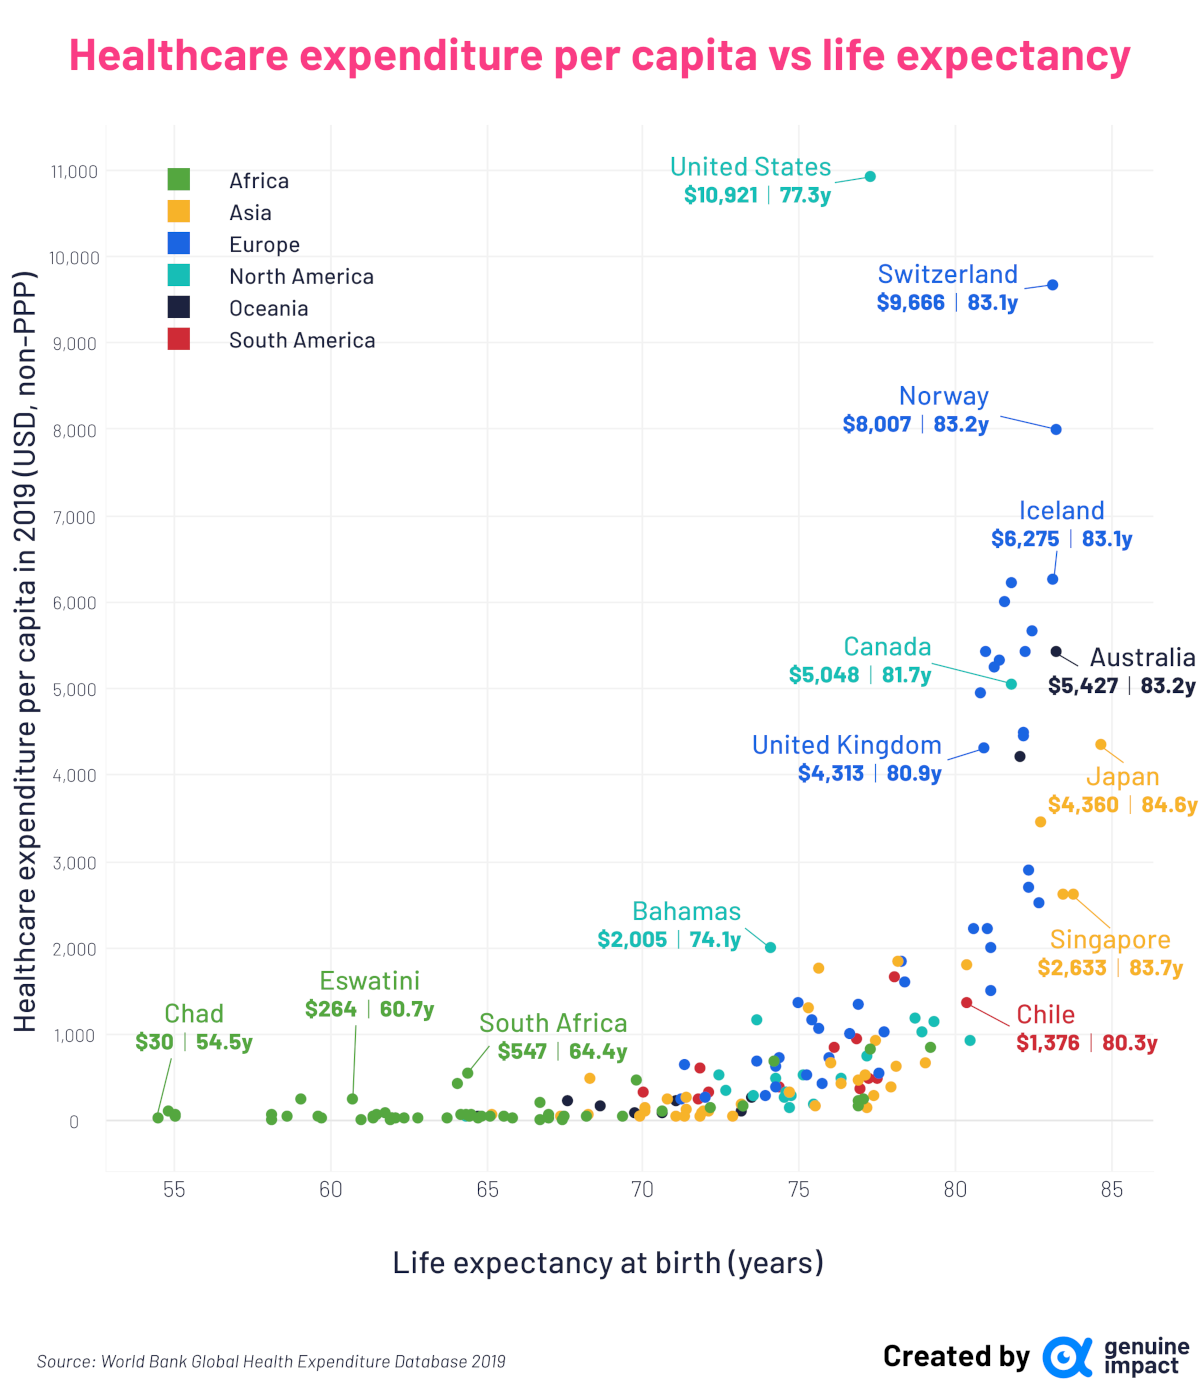 Comparing Countries' Healthcare Spend to Their Average Life Expectancies